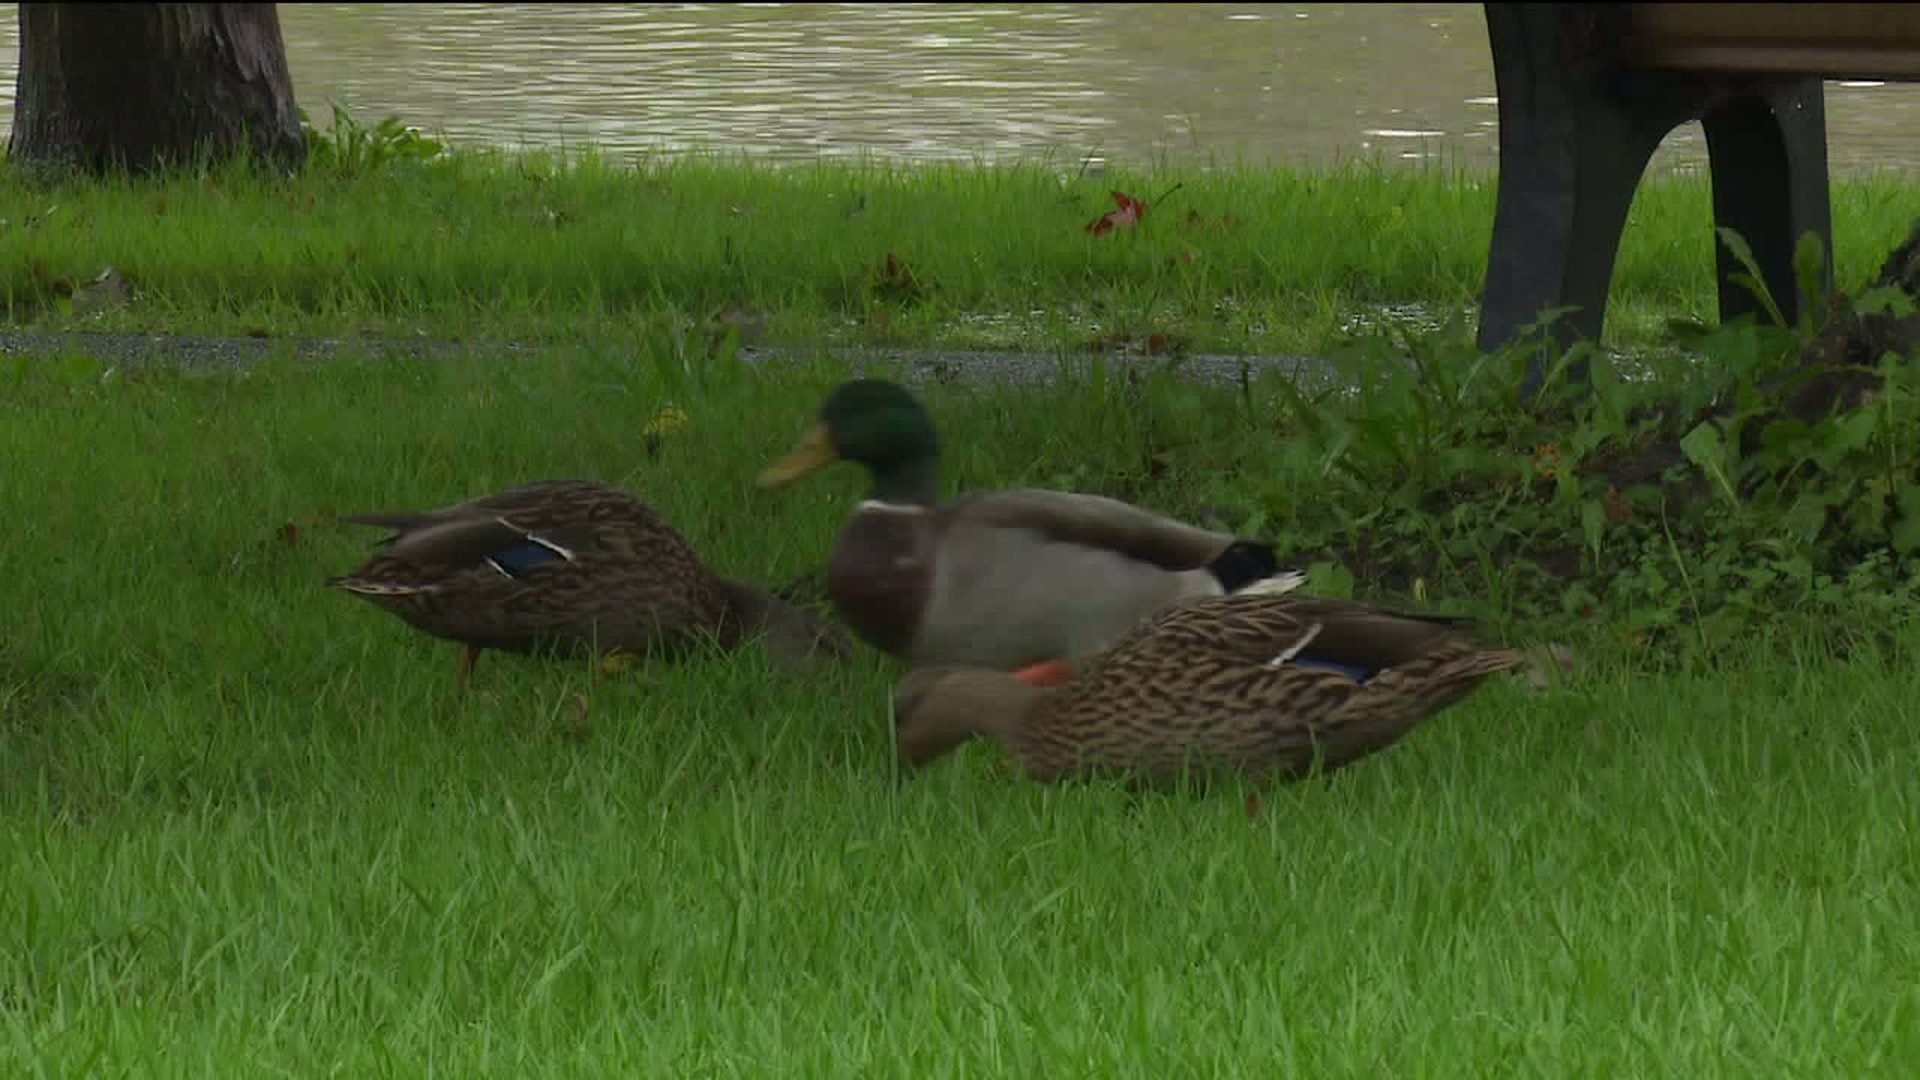 Police Searching for Duck Killers